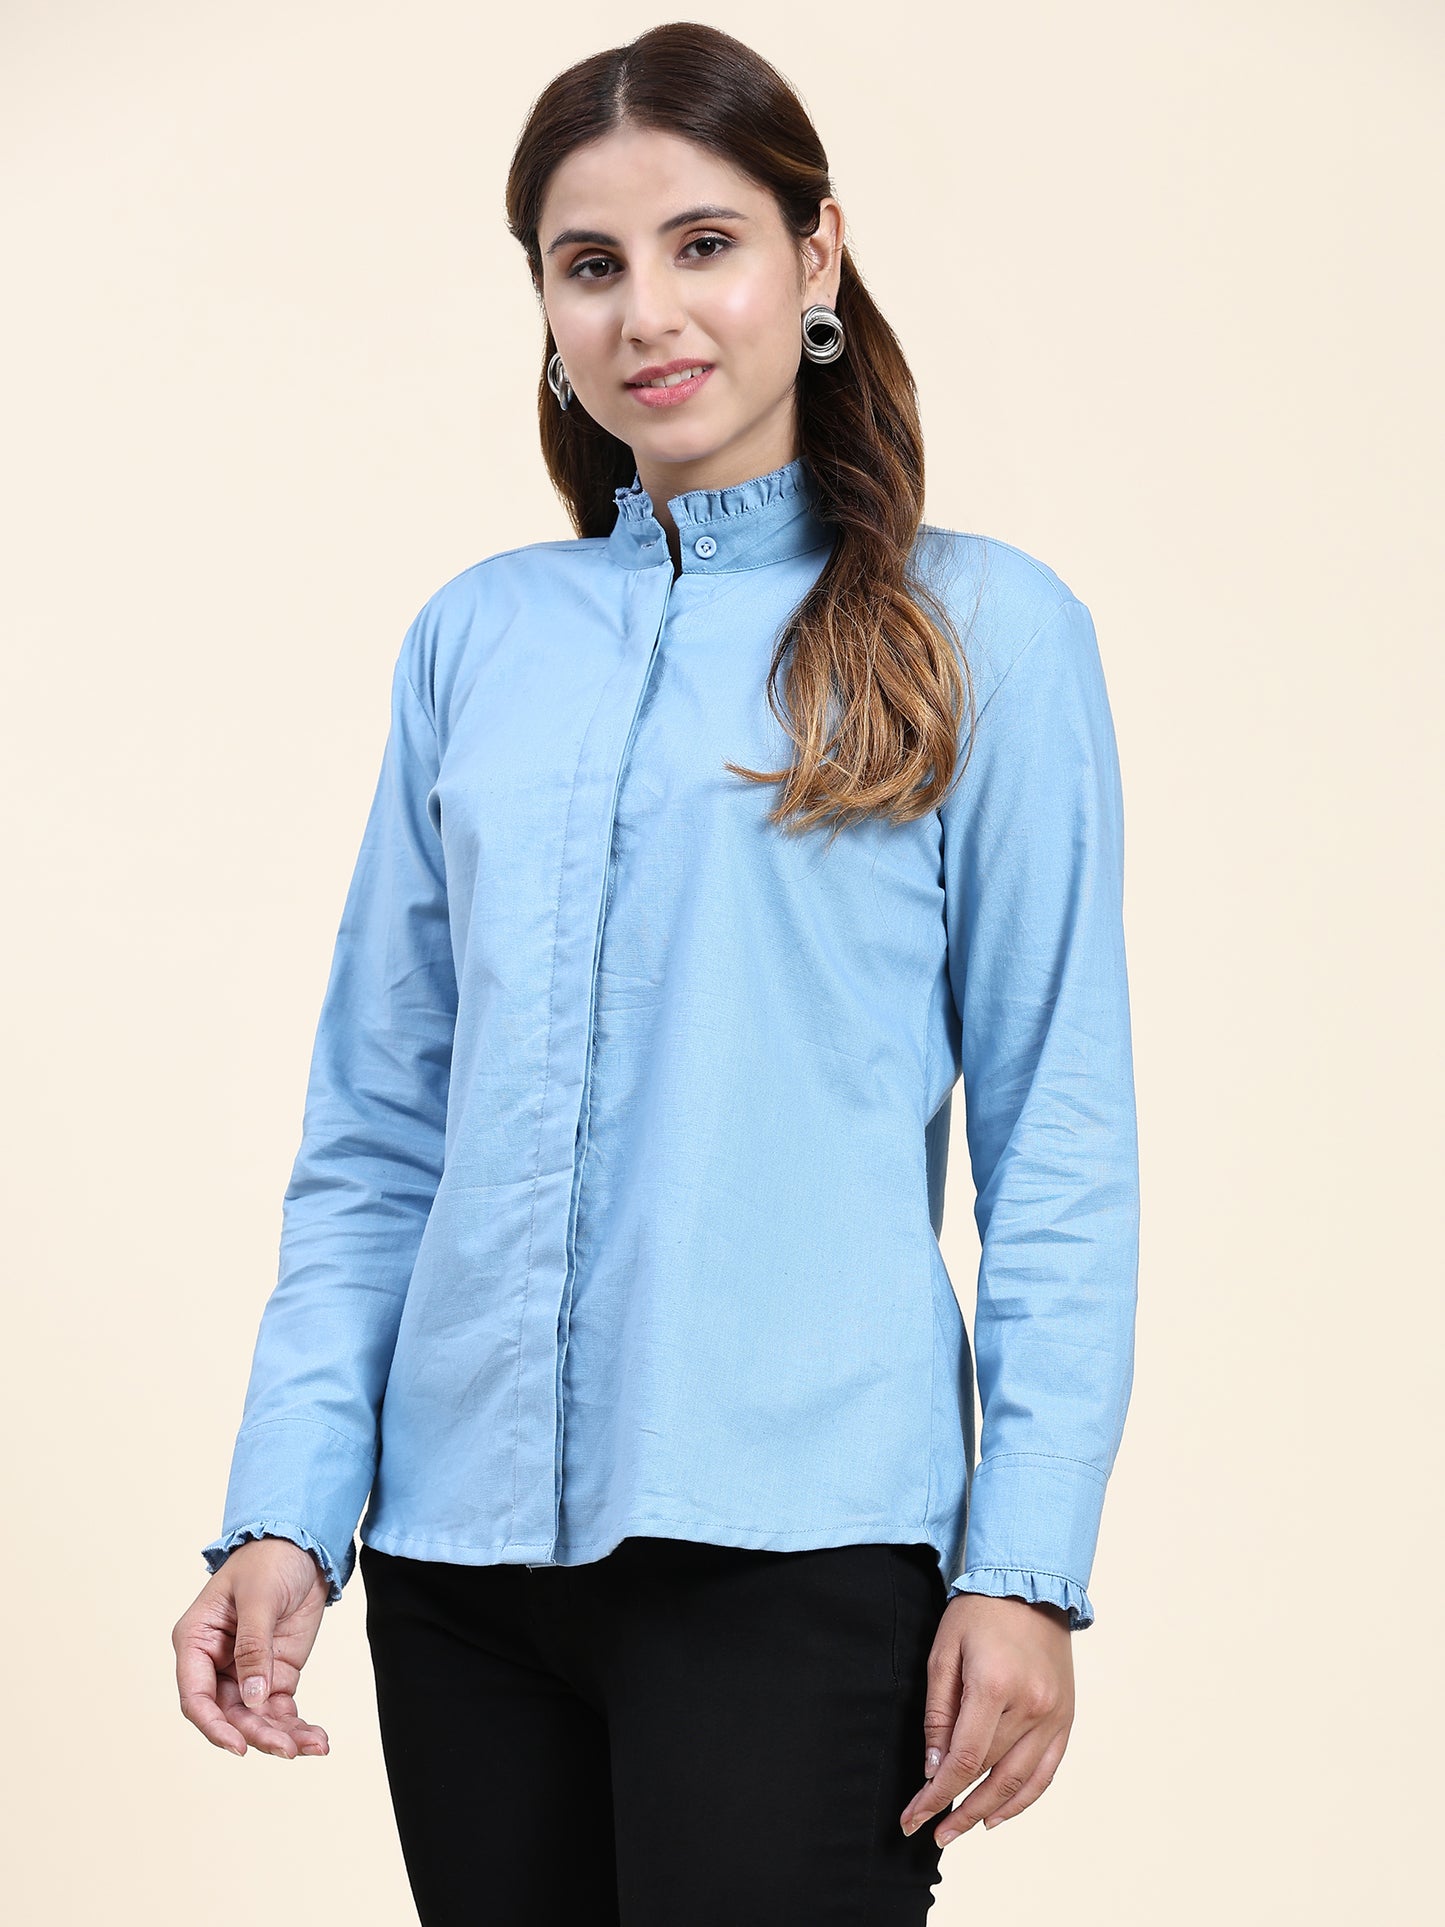 ANUSHIL Women's Cotton Shirts : Comfortable and Fashionable with Gathered Neck and Sleeves, Blue